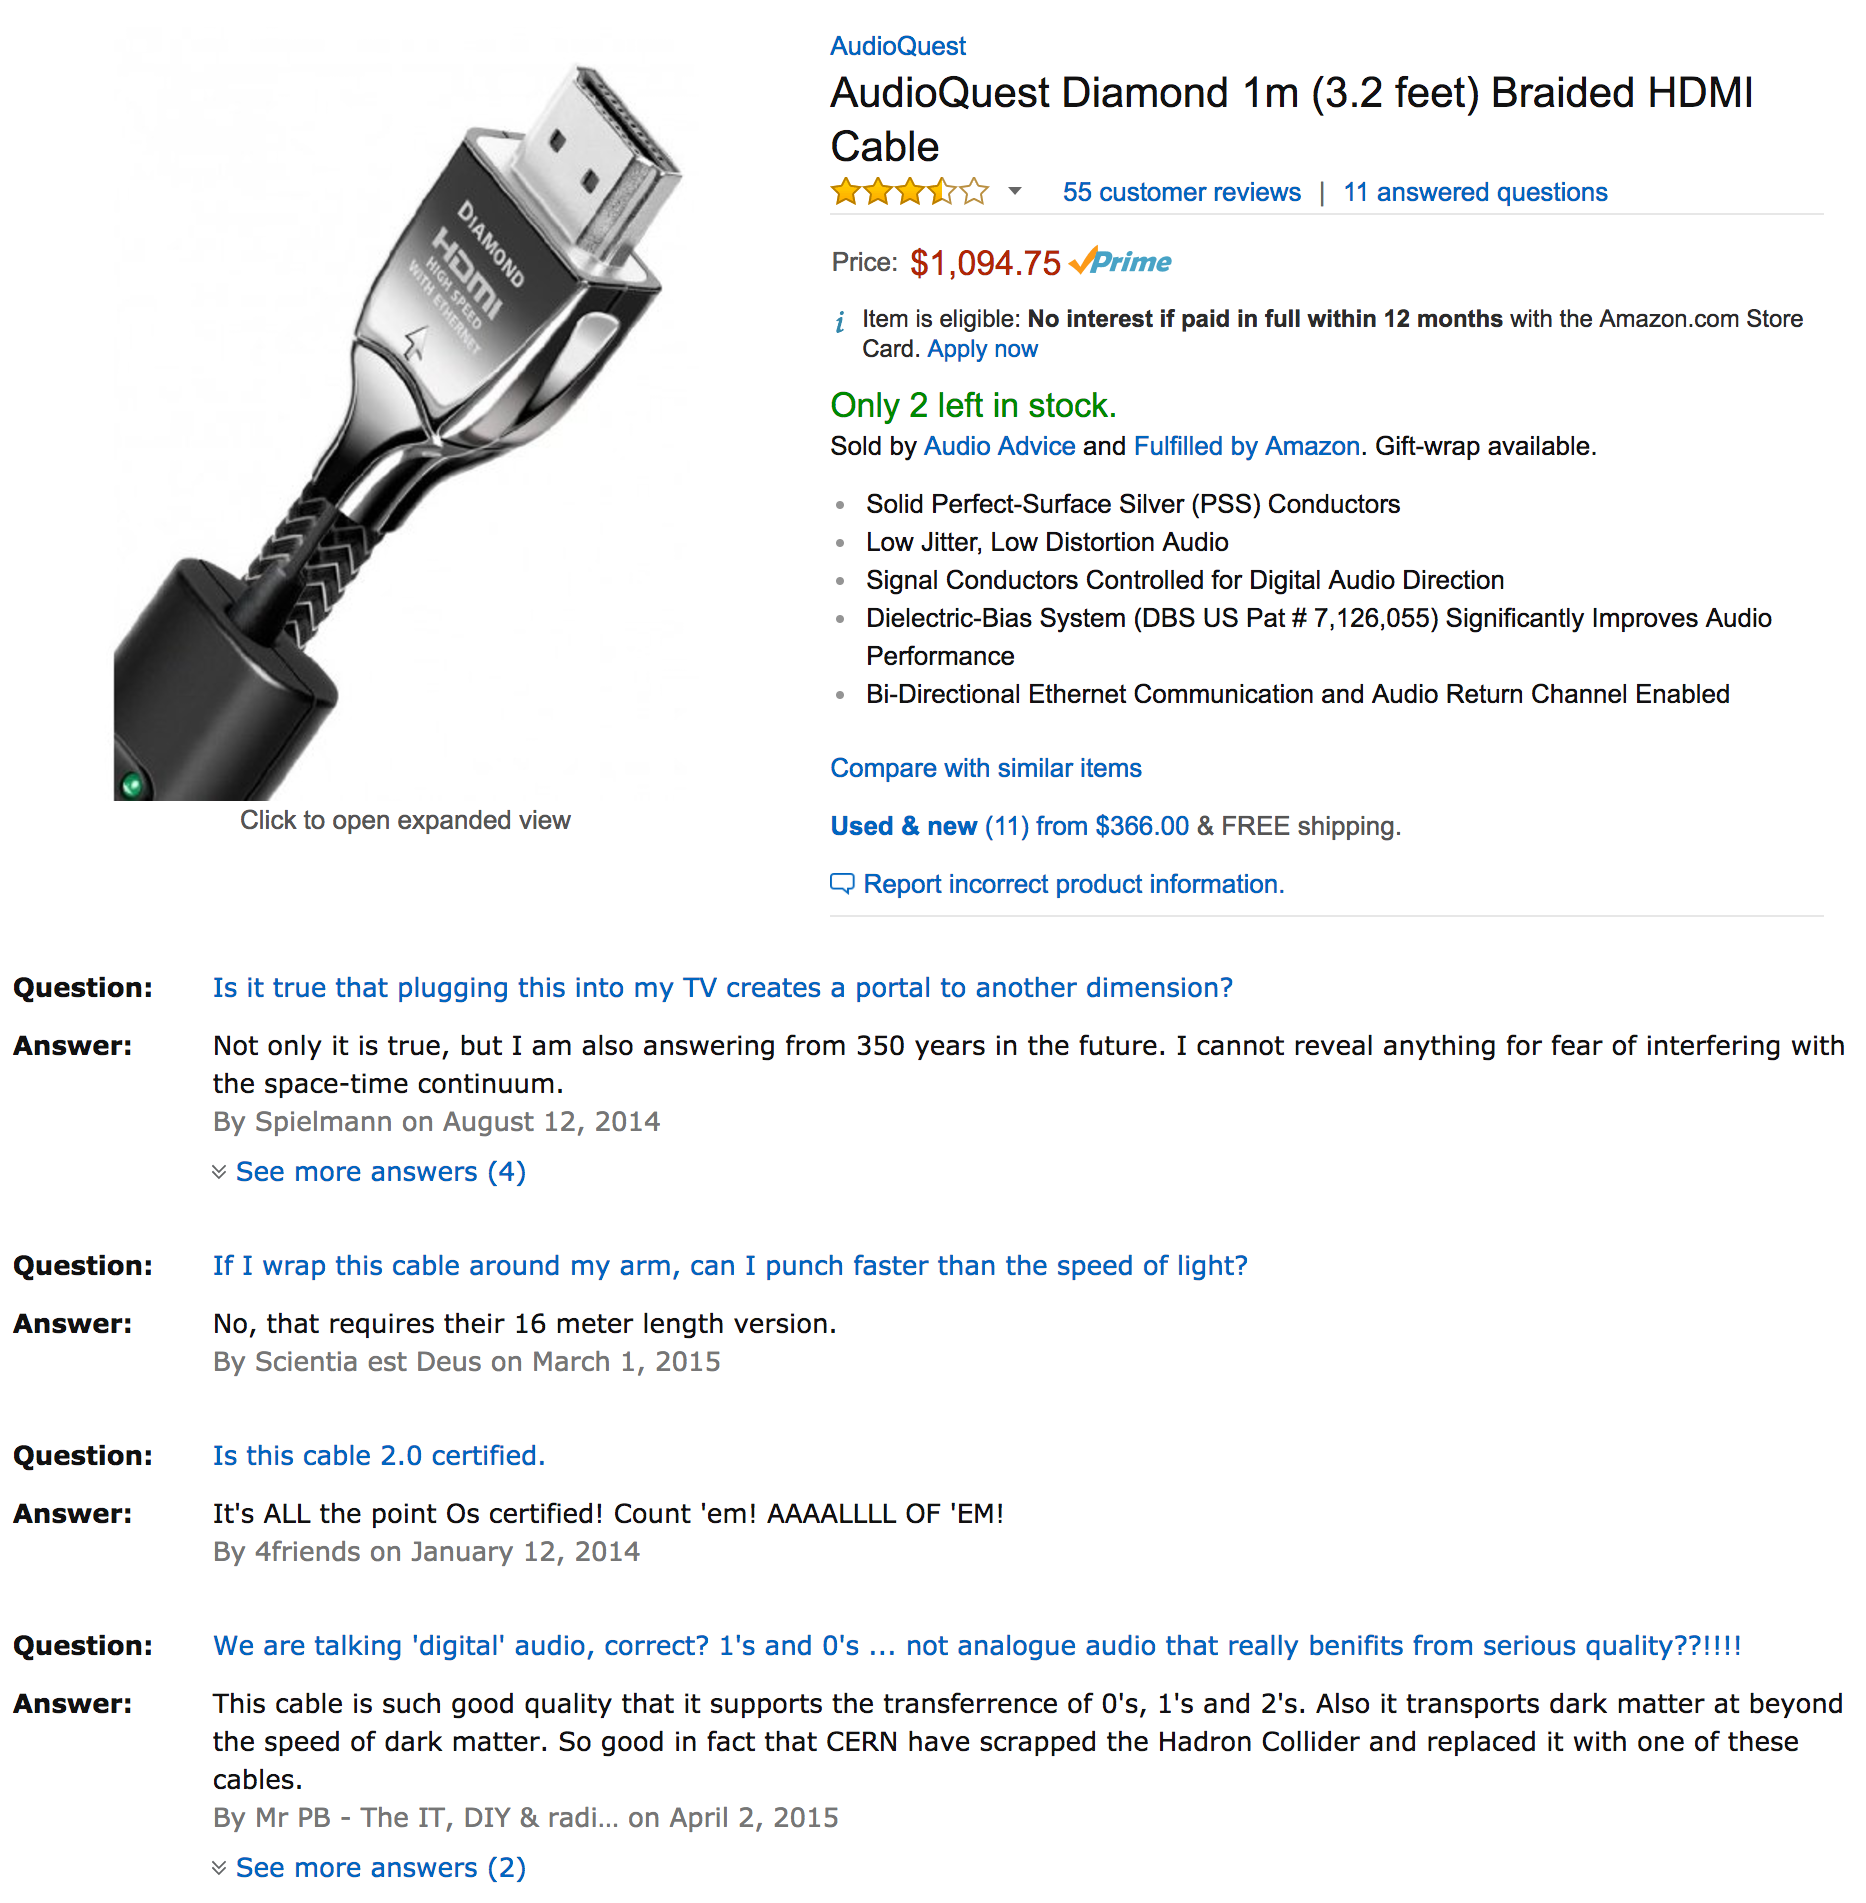 Questions answered about a $1000 HDMI cable on Amazon.